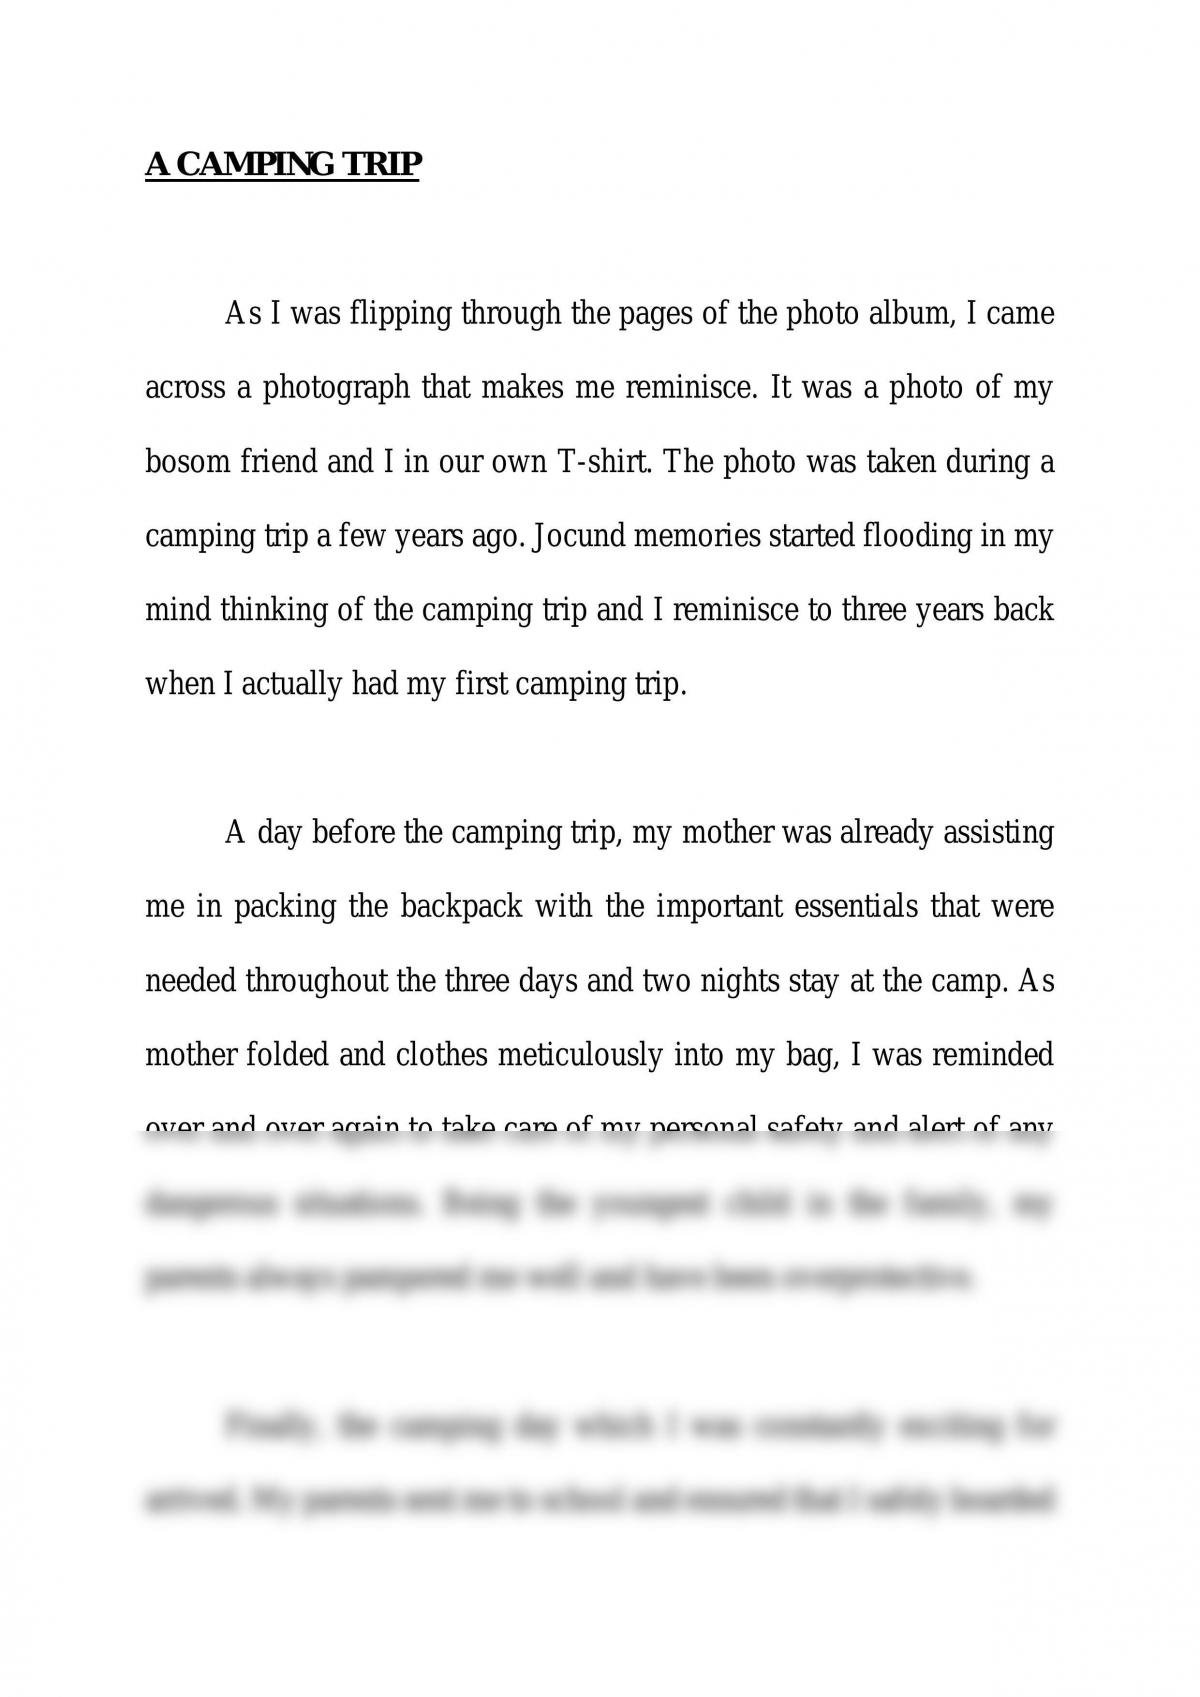 narrative essay about camping